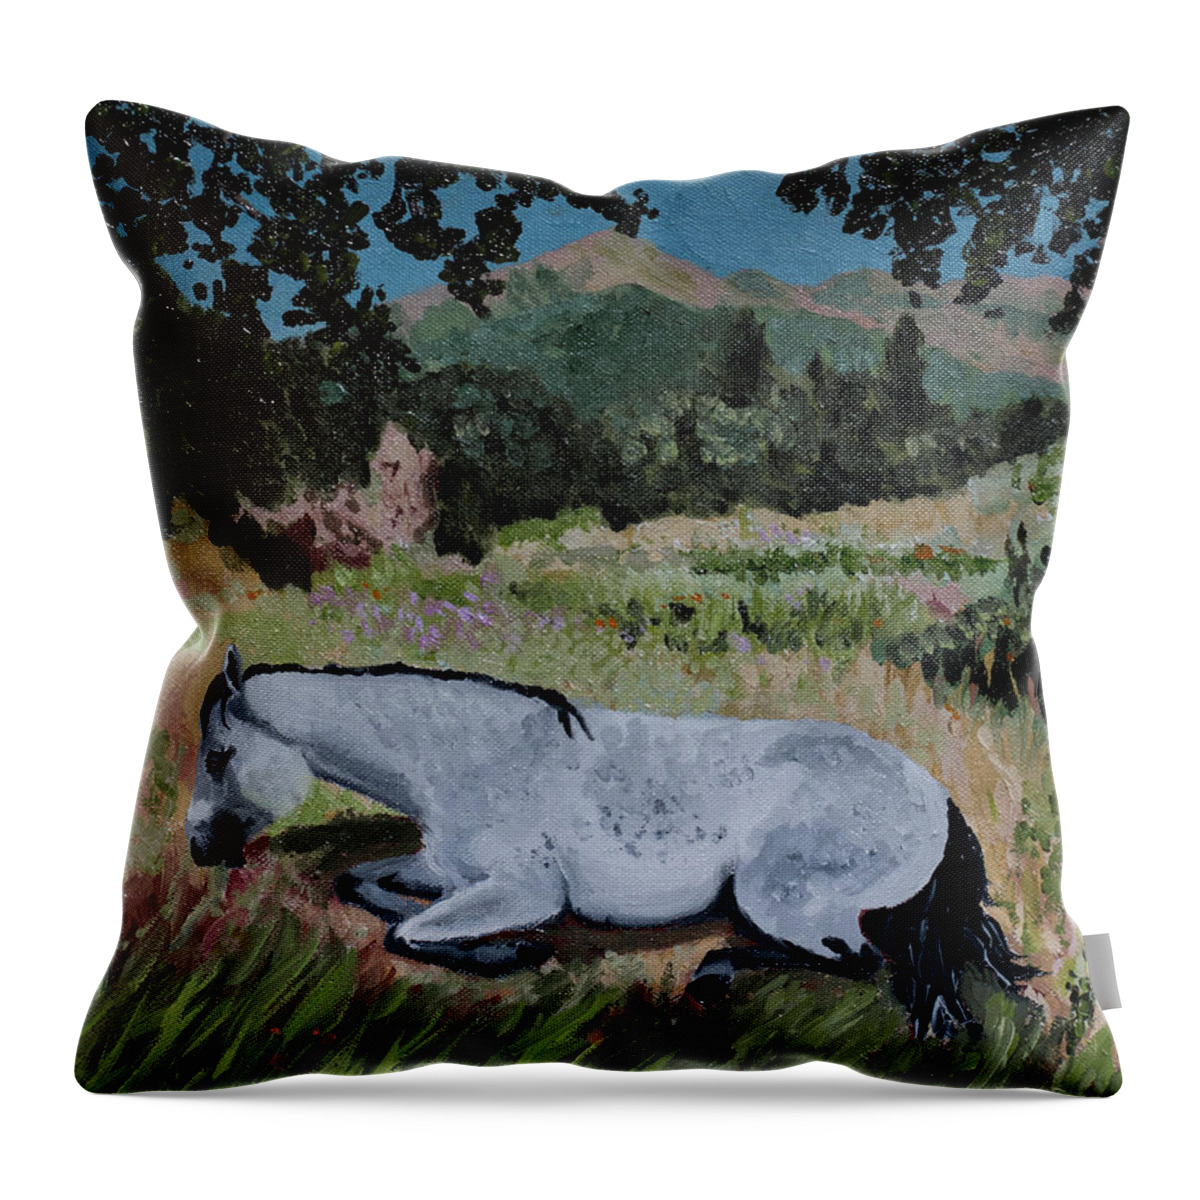 Landscape Throw Pillow featuring the painting Napping Horse by Jackie MacNair